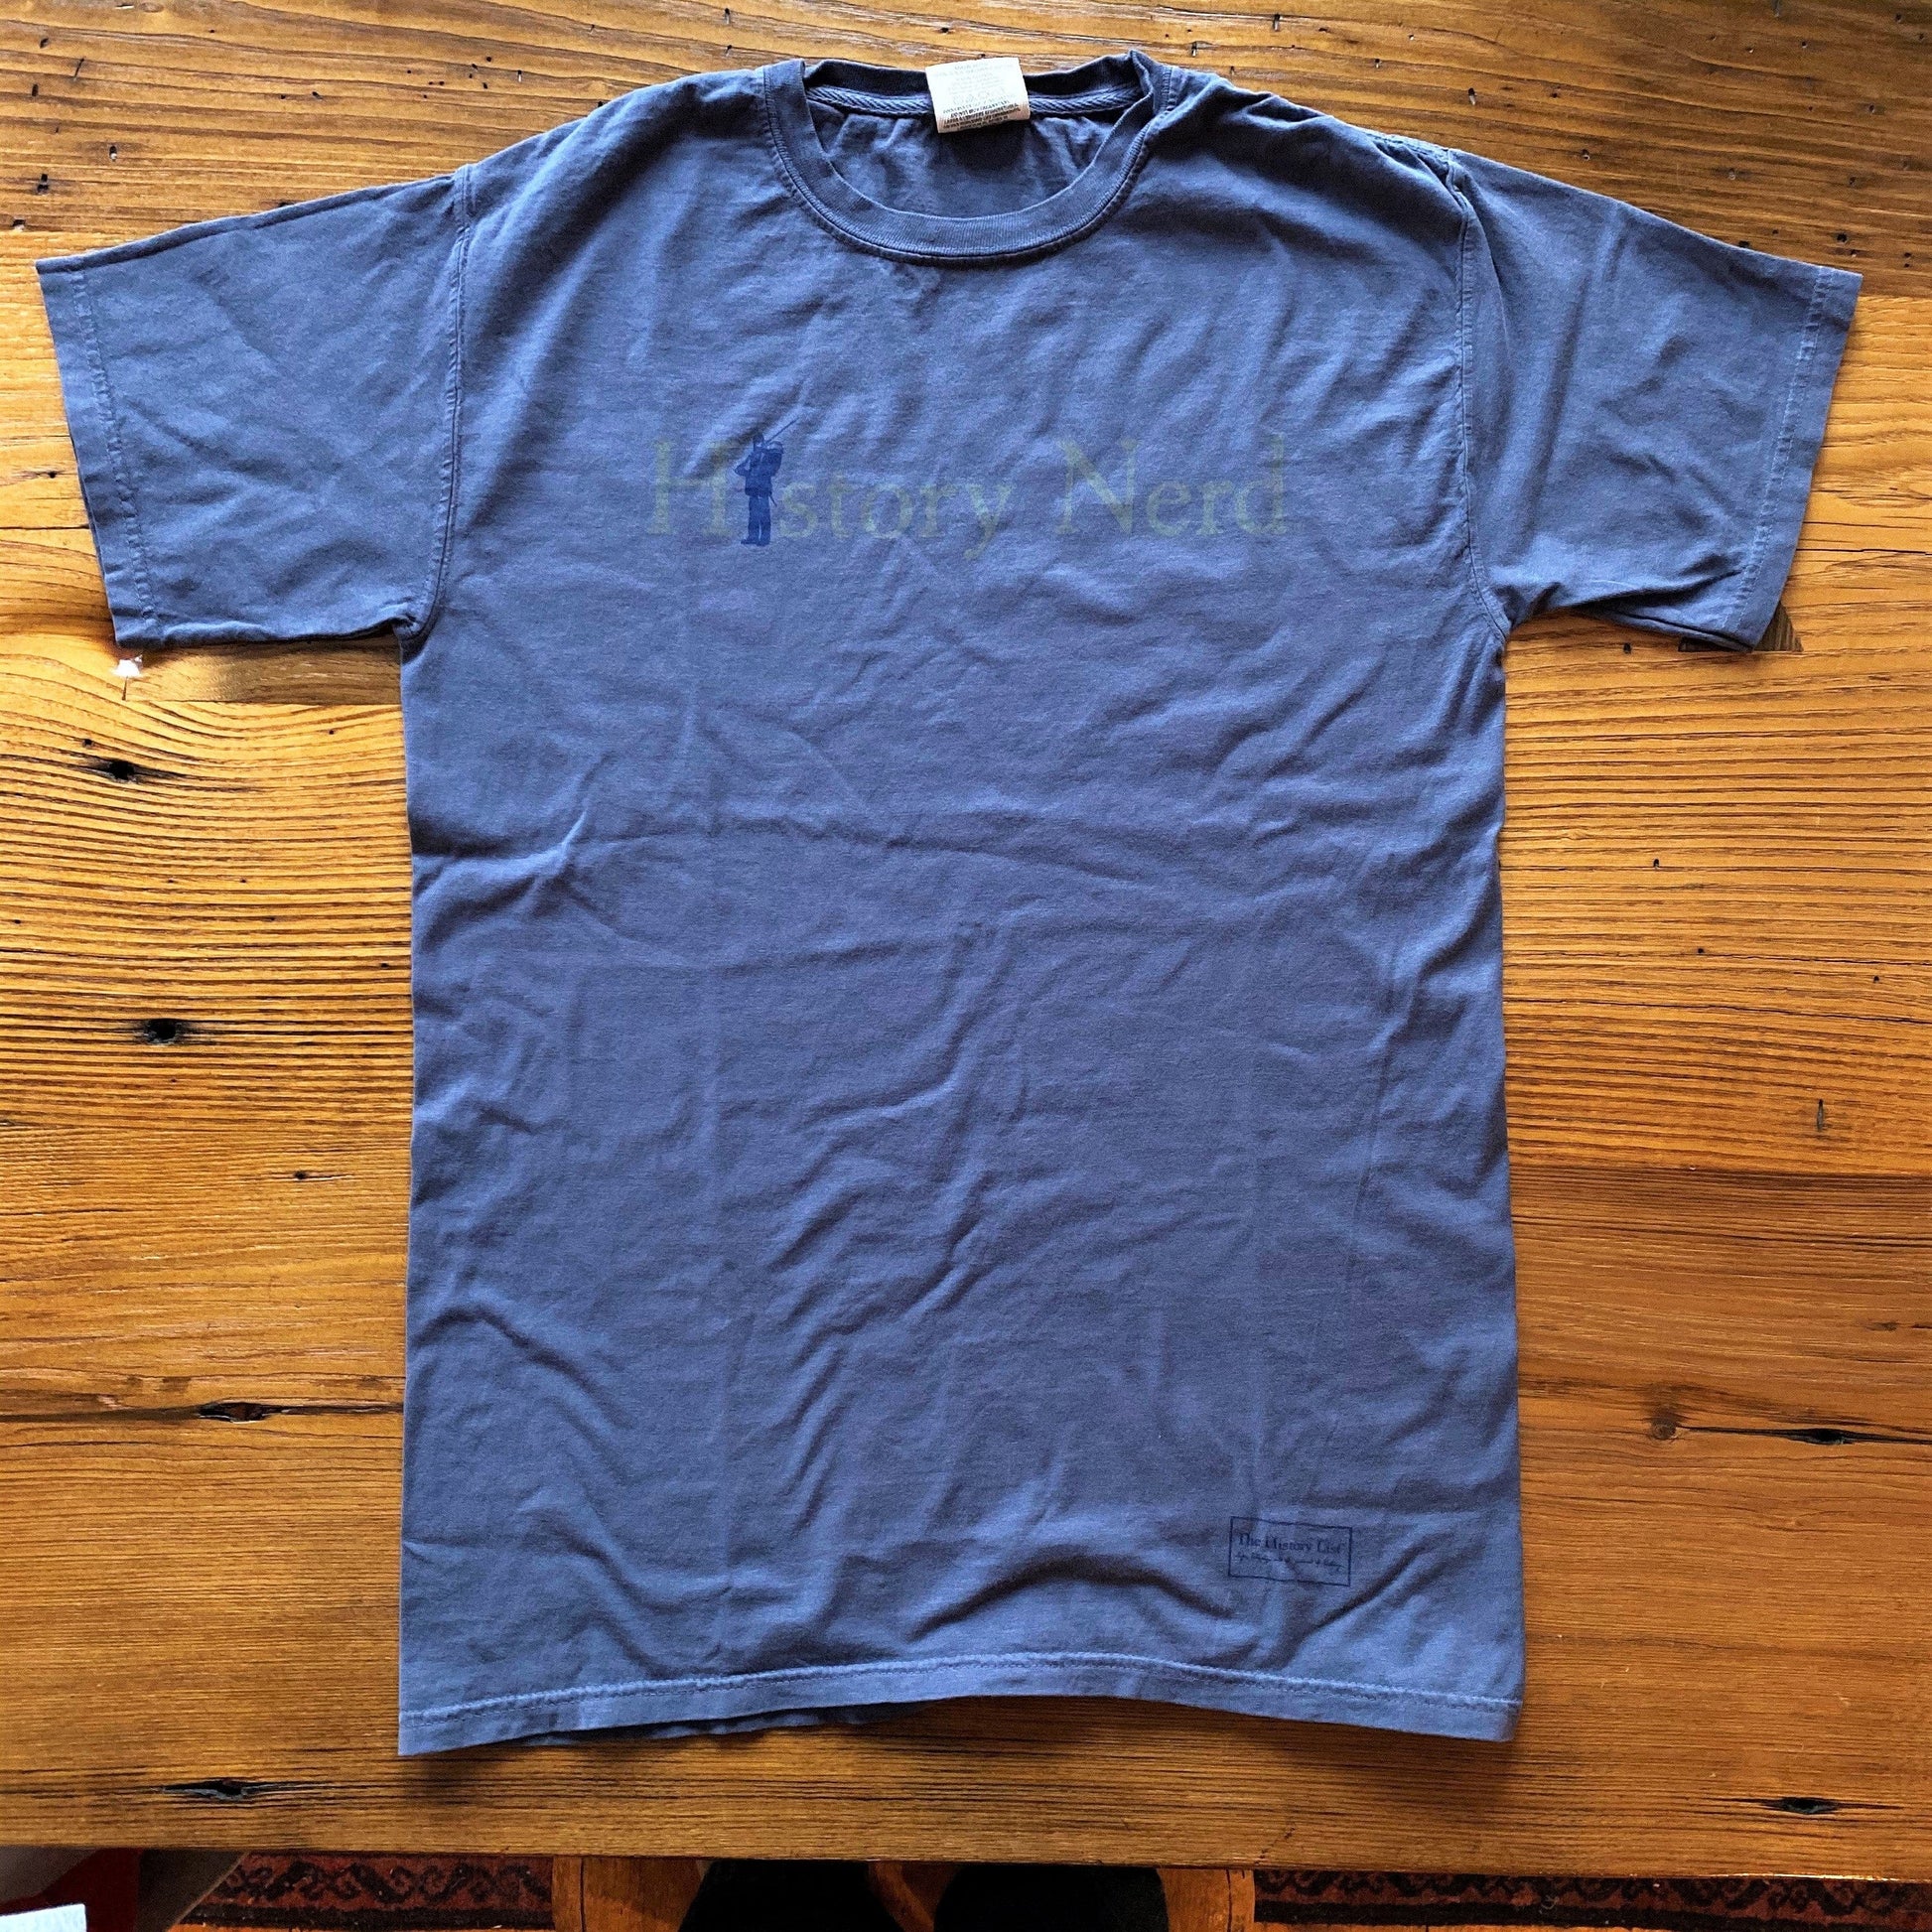 Civil War "History Nerd" Shirt in Slate blue from The History List store